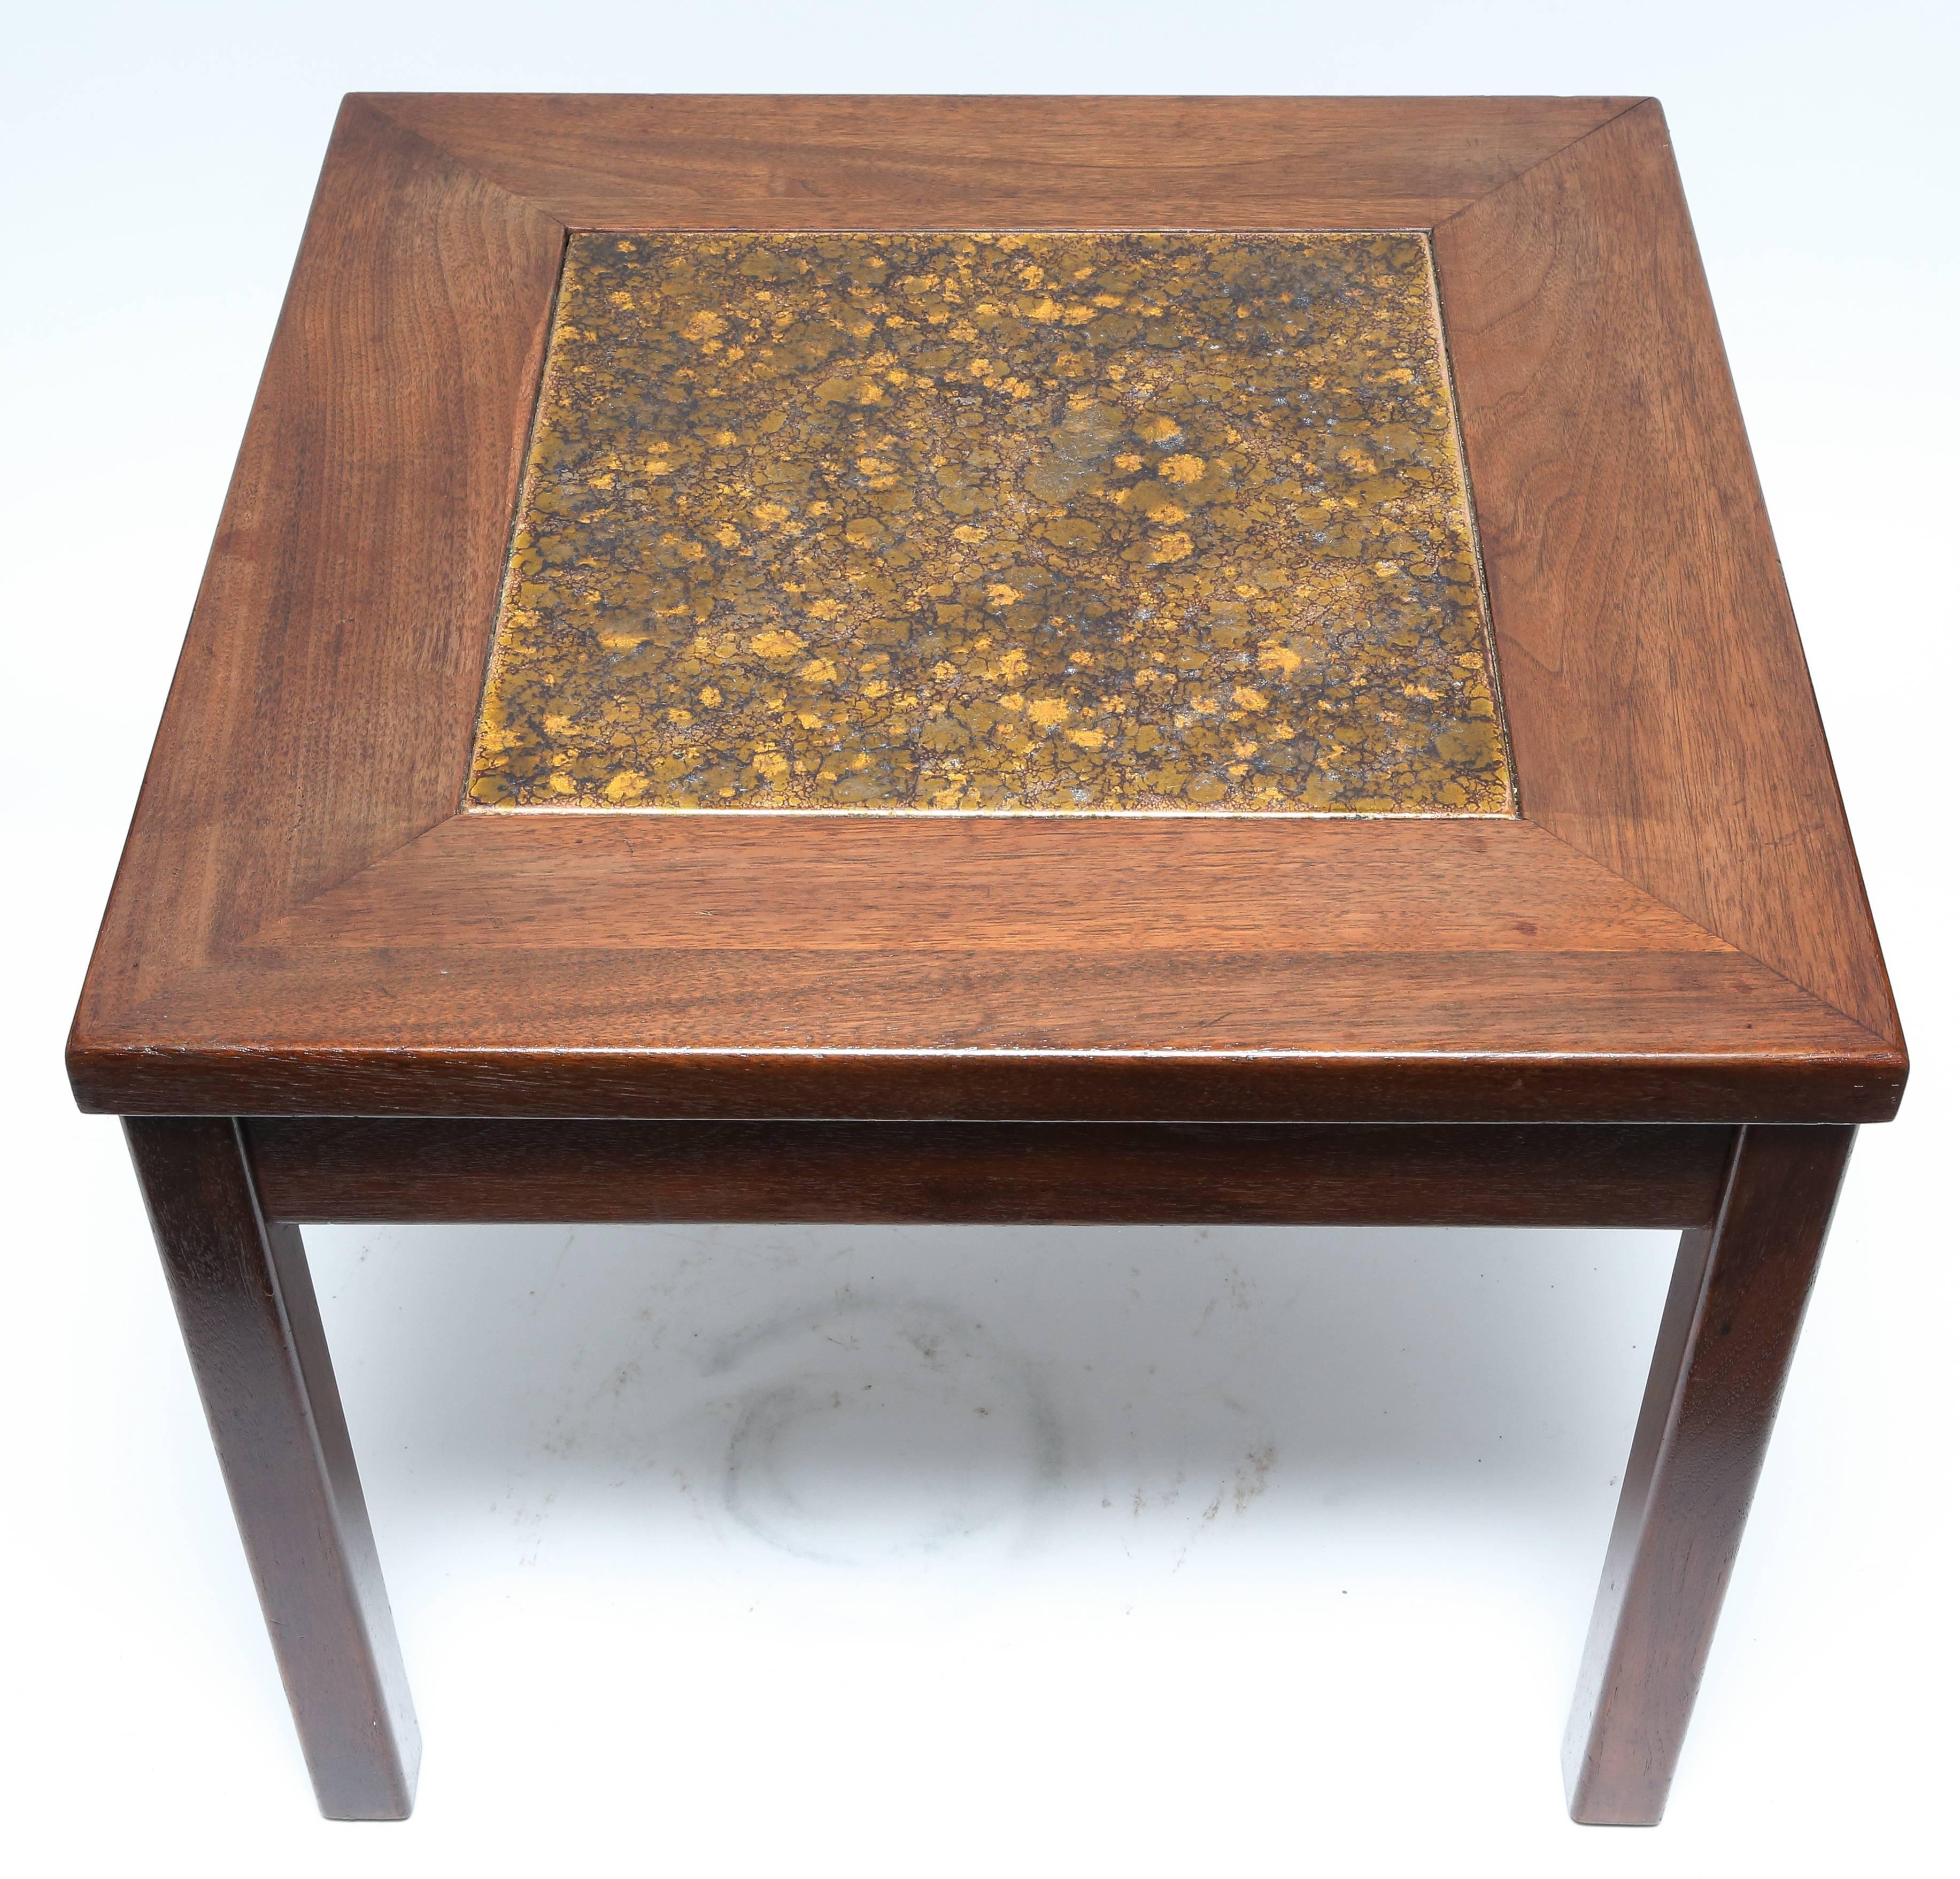 Constructed of walnut with rich stain fin. Copper enamel tile inset in constellation pattern centers; these tables are in very good vintage condition. Each table is signed.